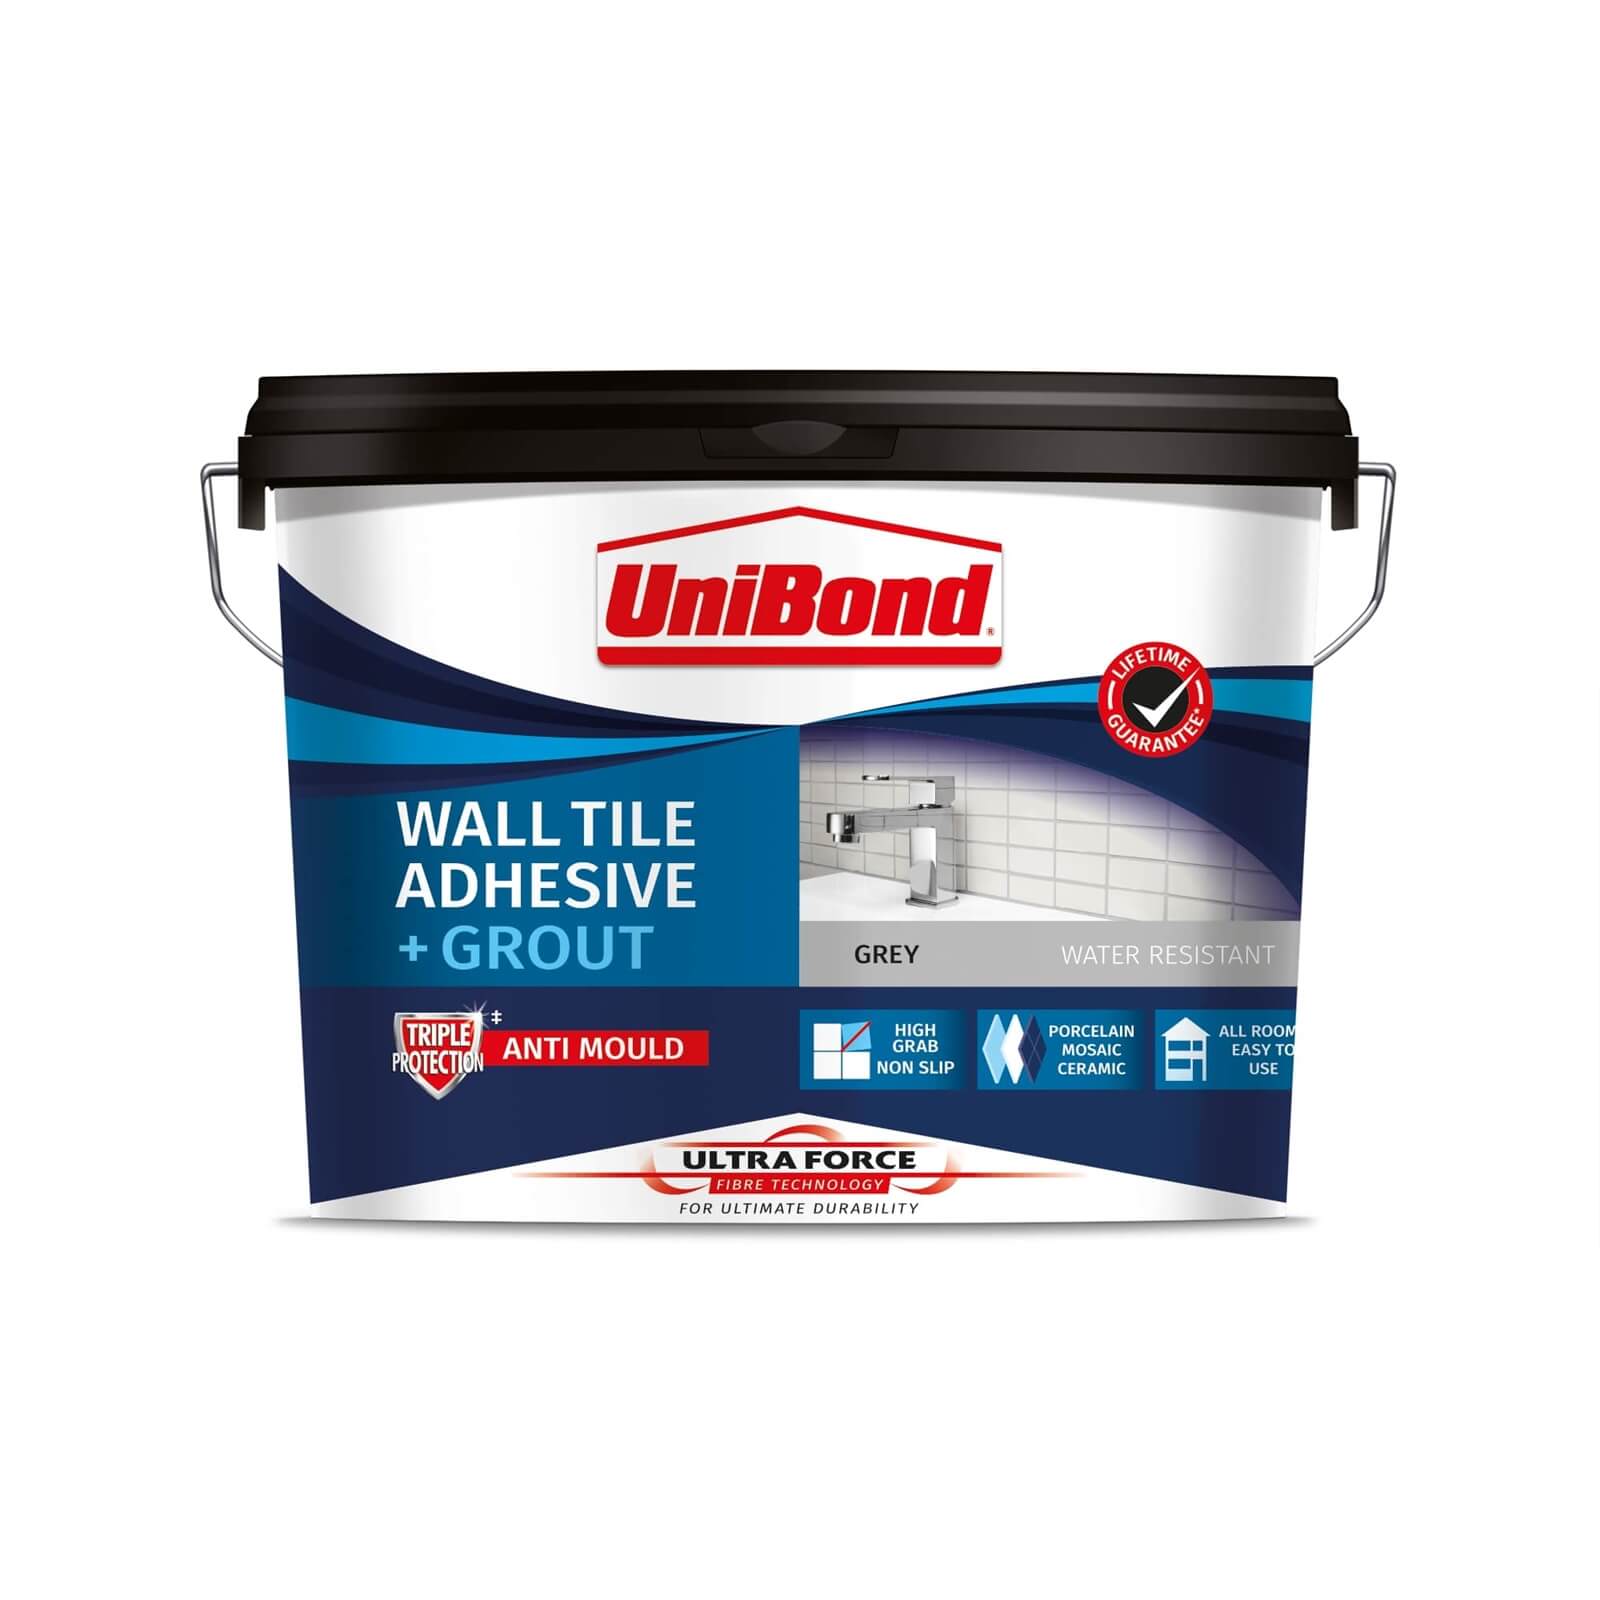 Photo of Unibond Ultraforce Wall Tile Adhesive & Grout Grey 12.8kg